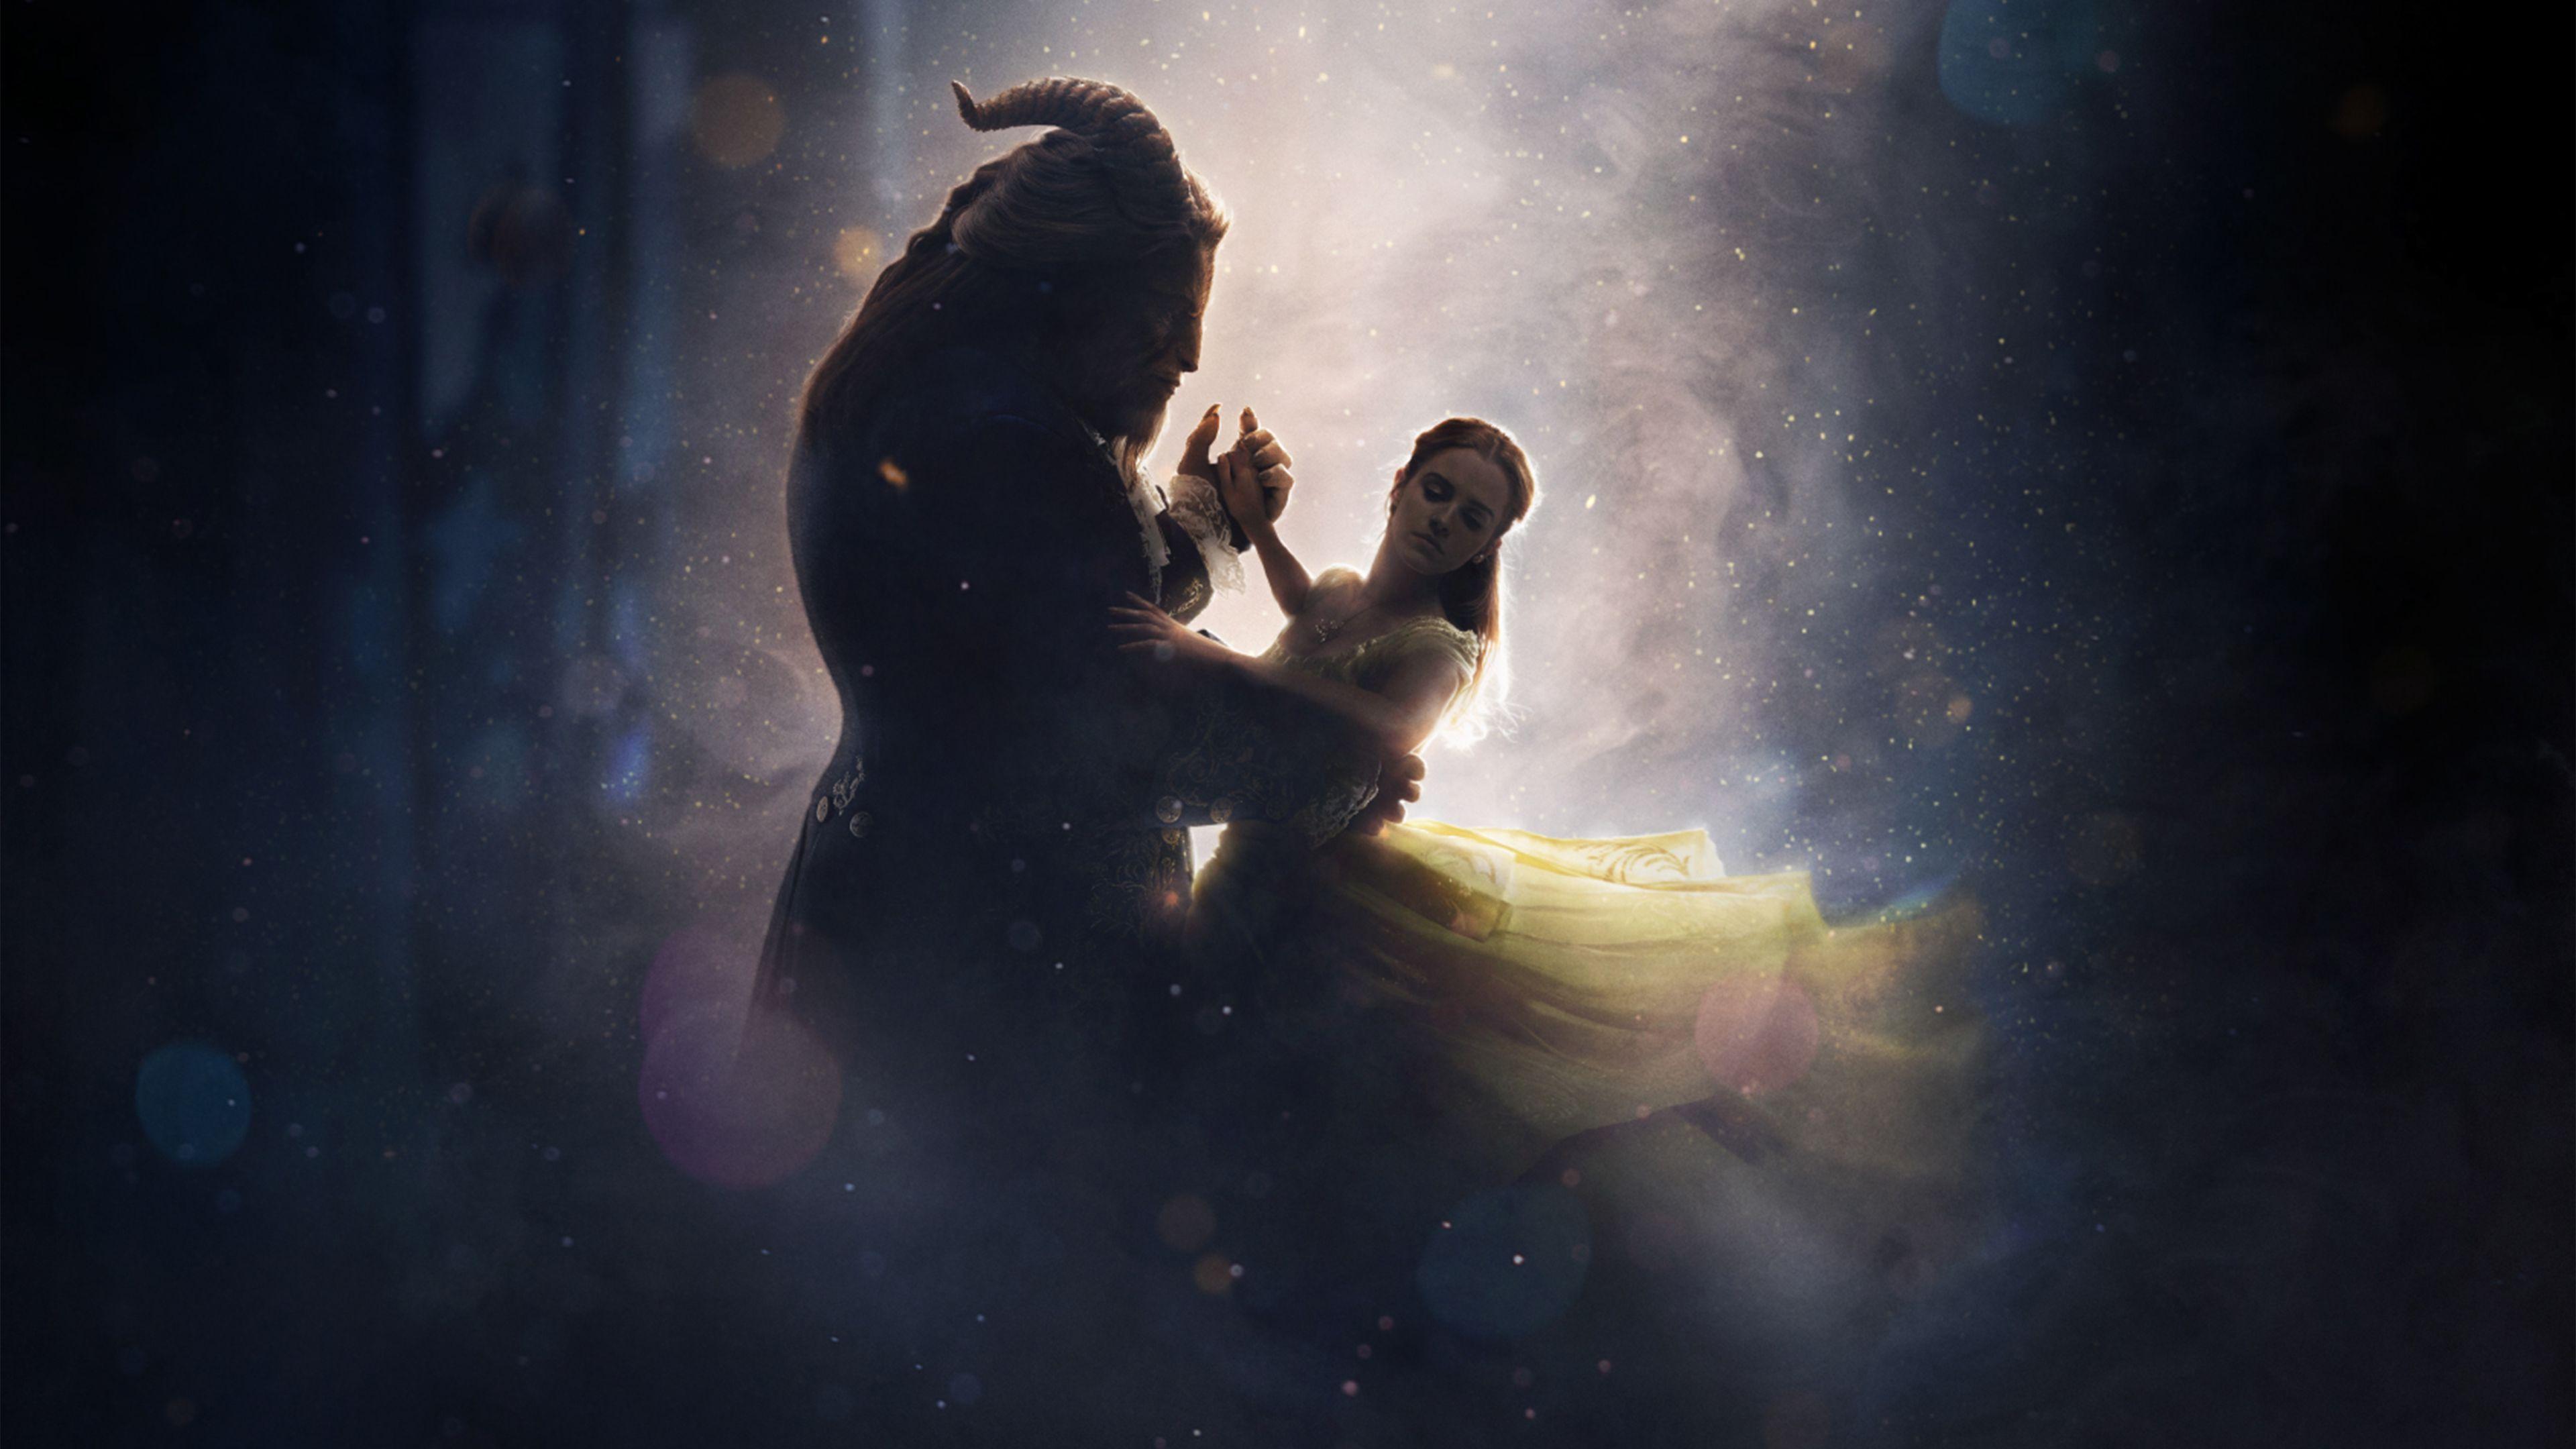 Beauty And The Beast (2017) HD Wallpaper